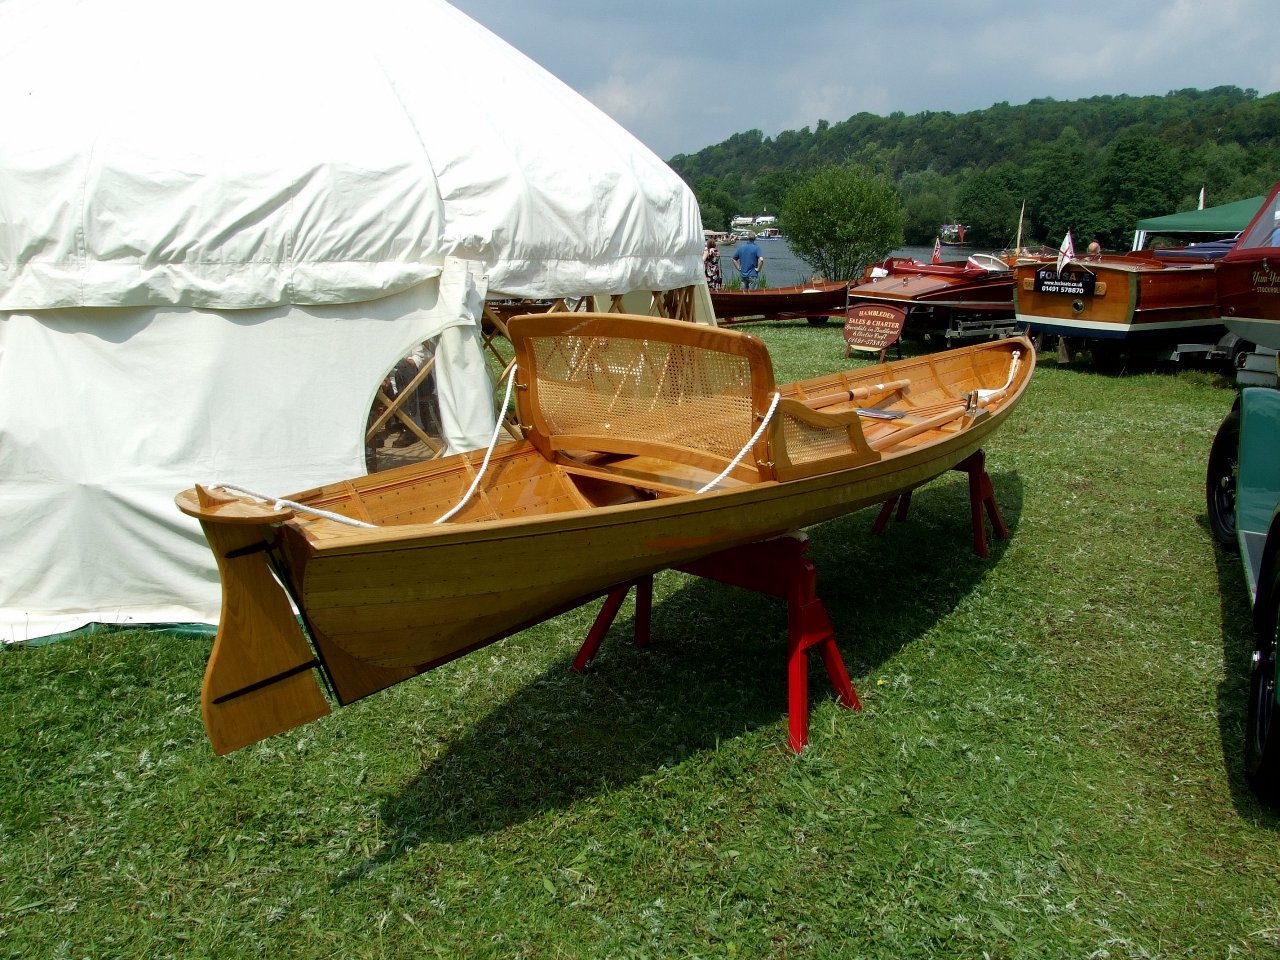 feast of rowing boats at the Beale Park Boat Show | intheboatshed ...